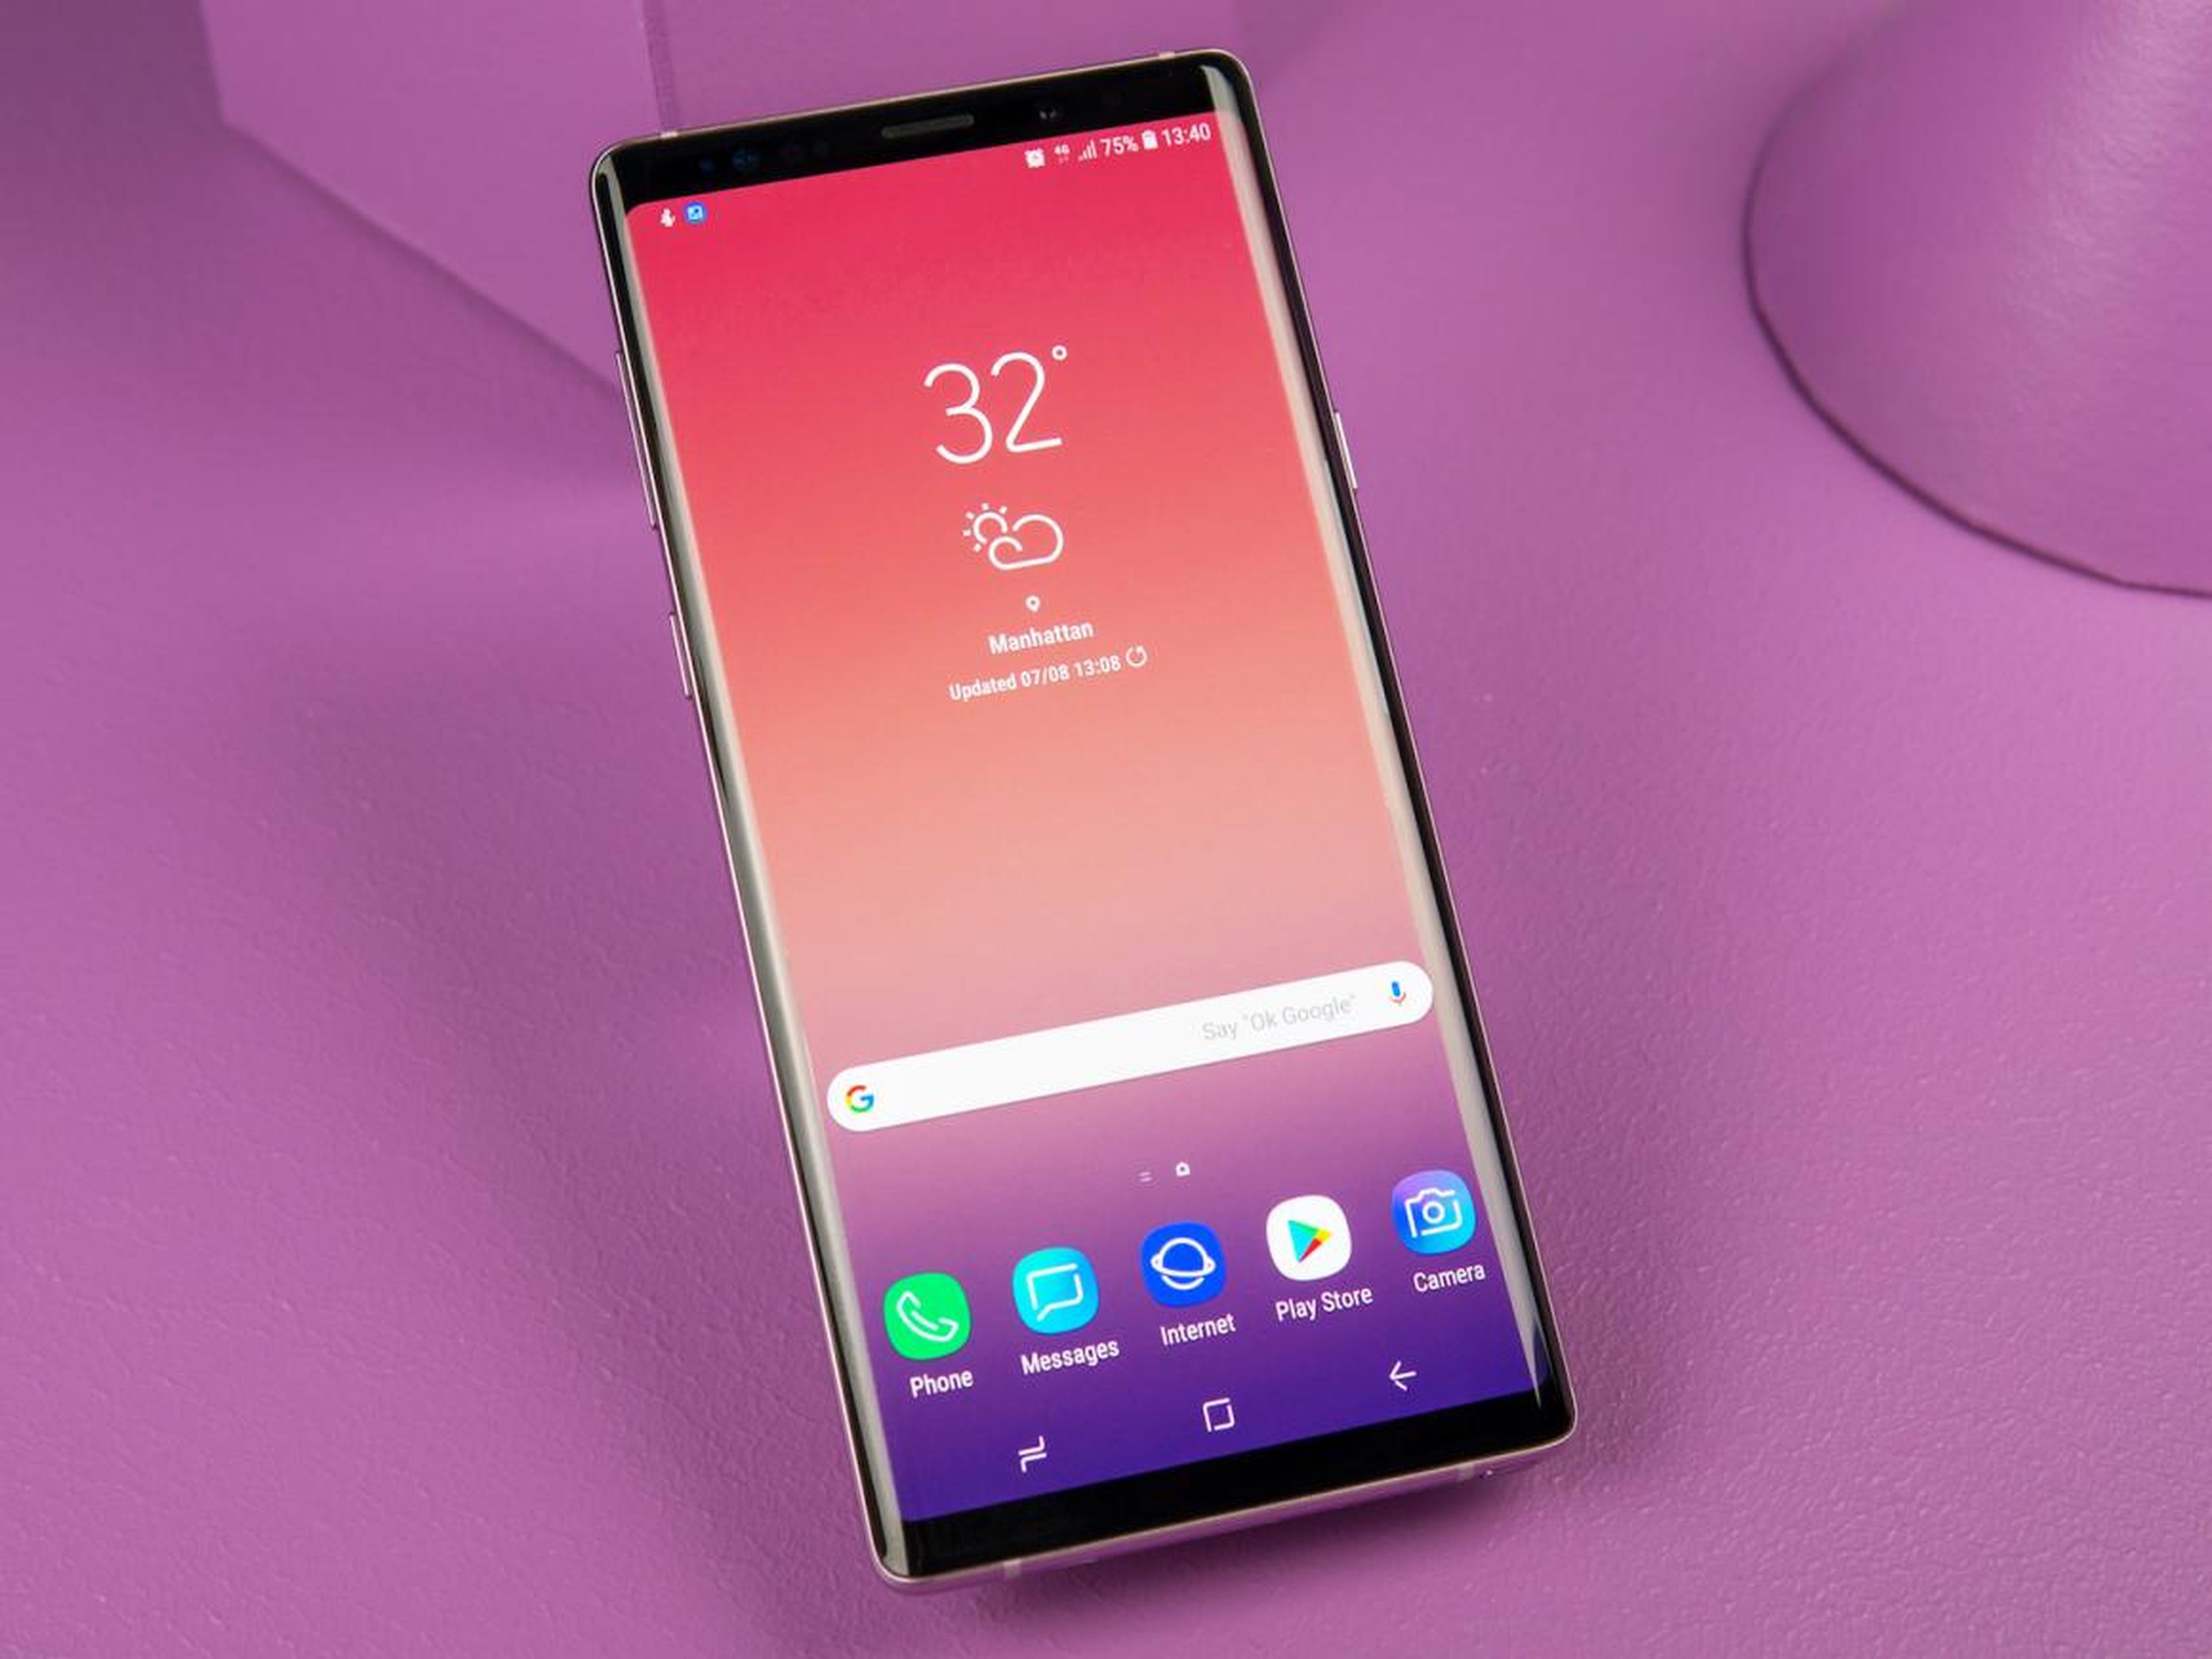 The Galaxy Note 9 has a larger and better screen.